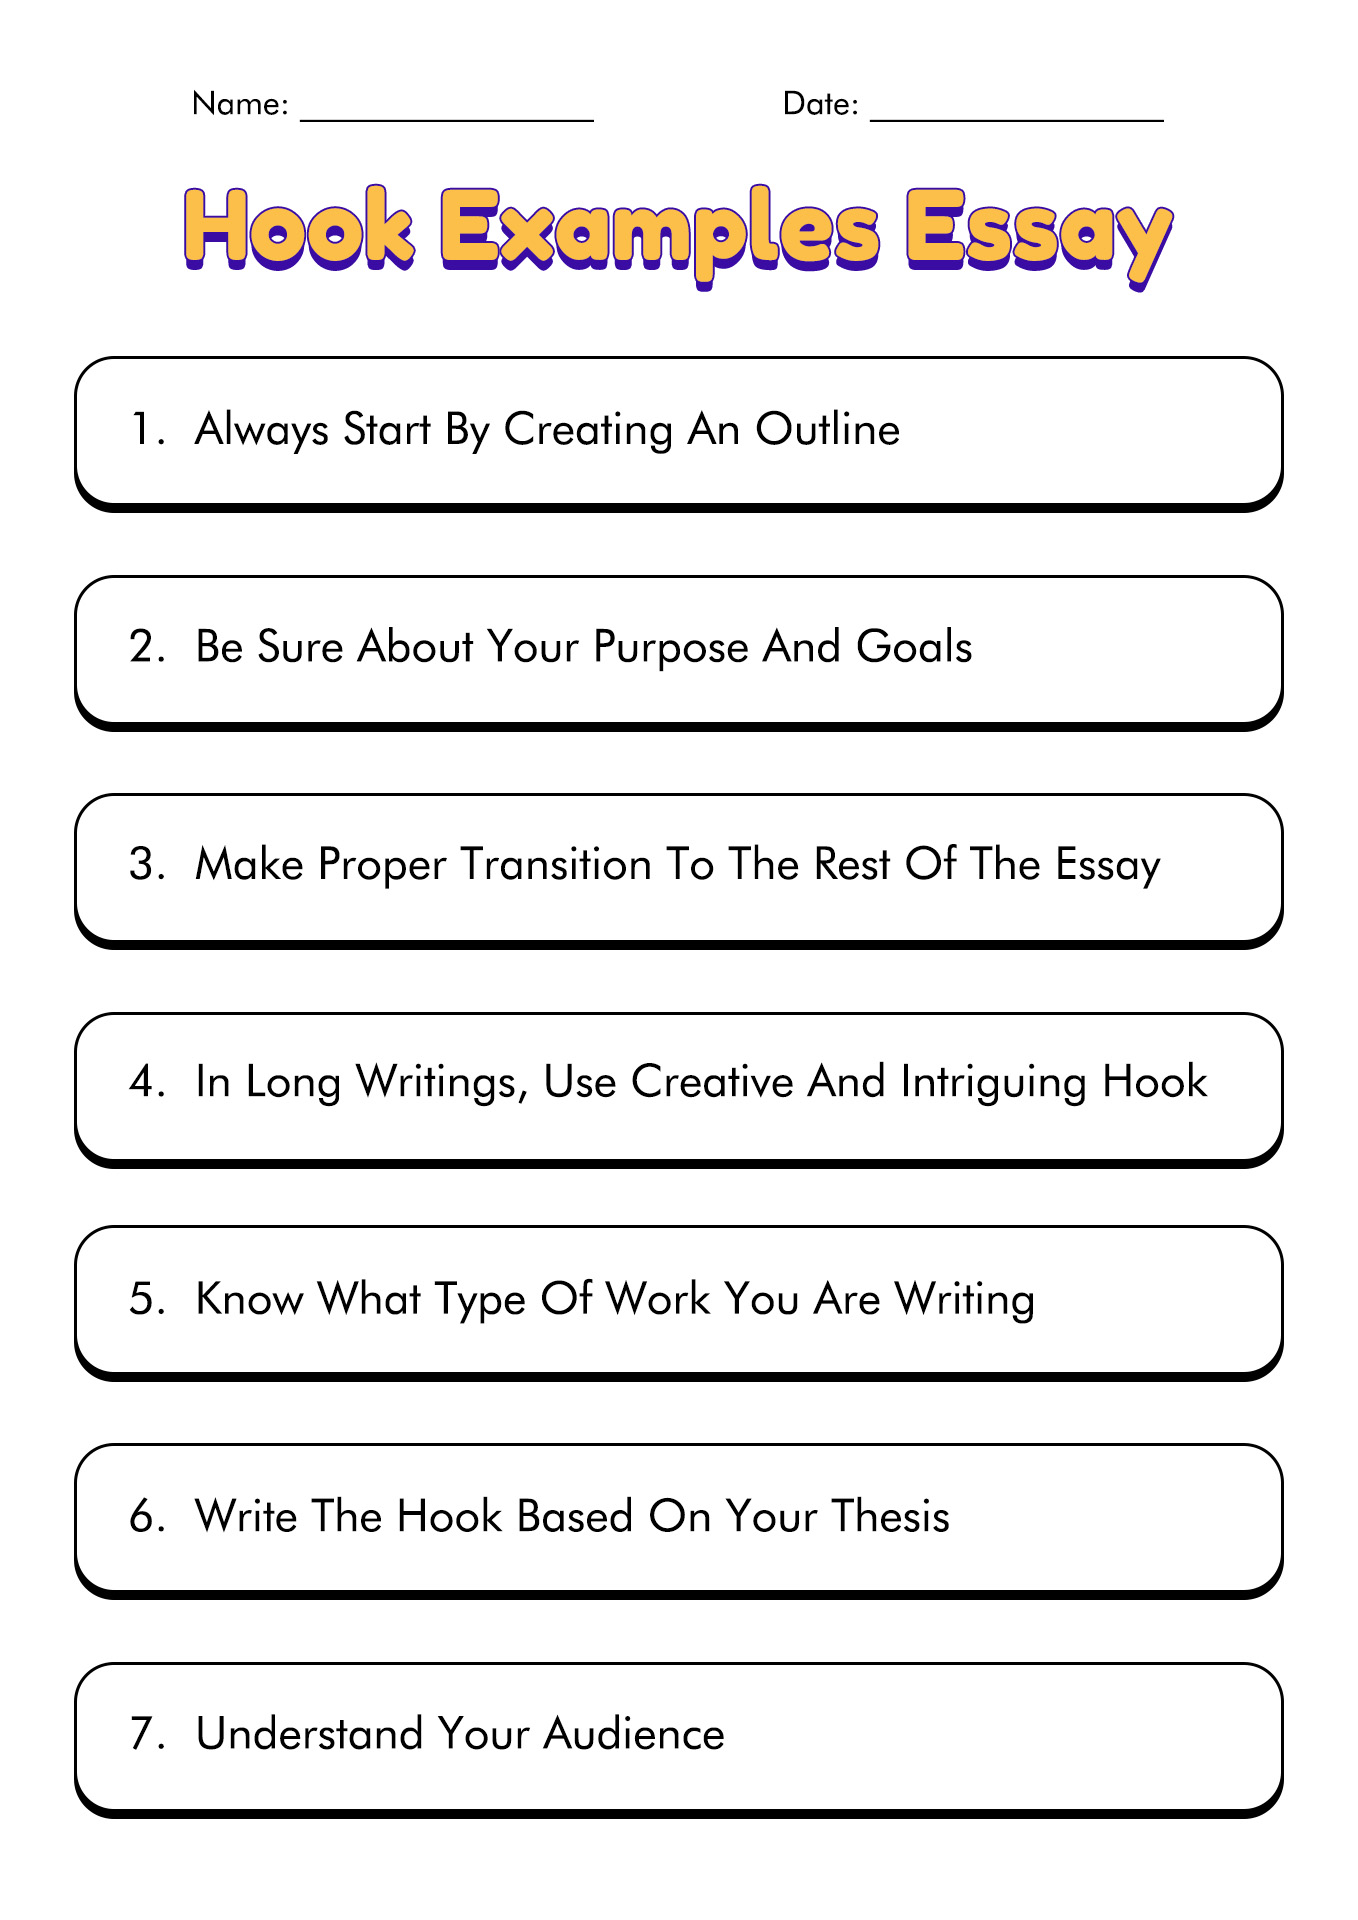 Examples of good hooks for essays